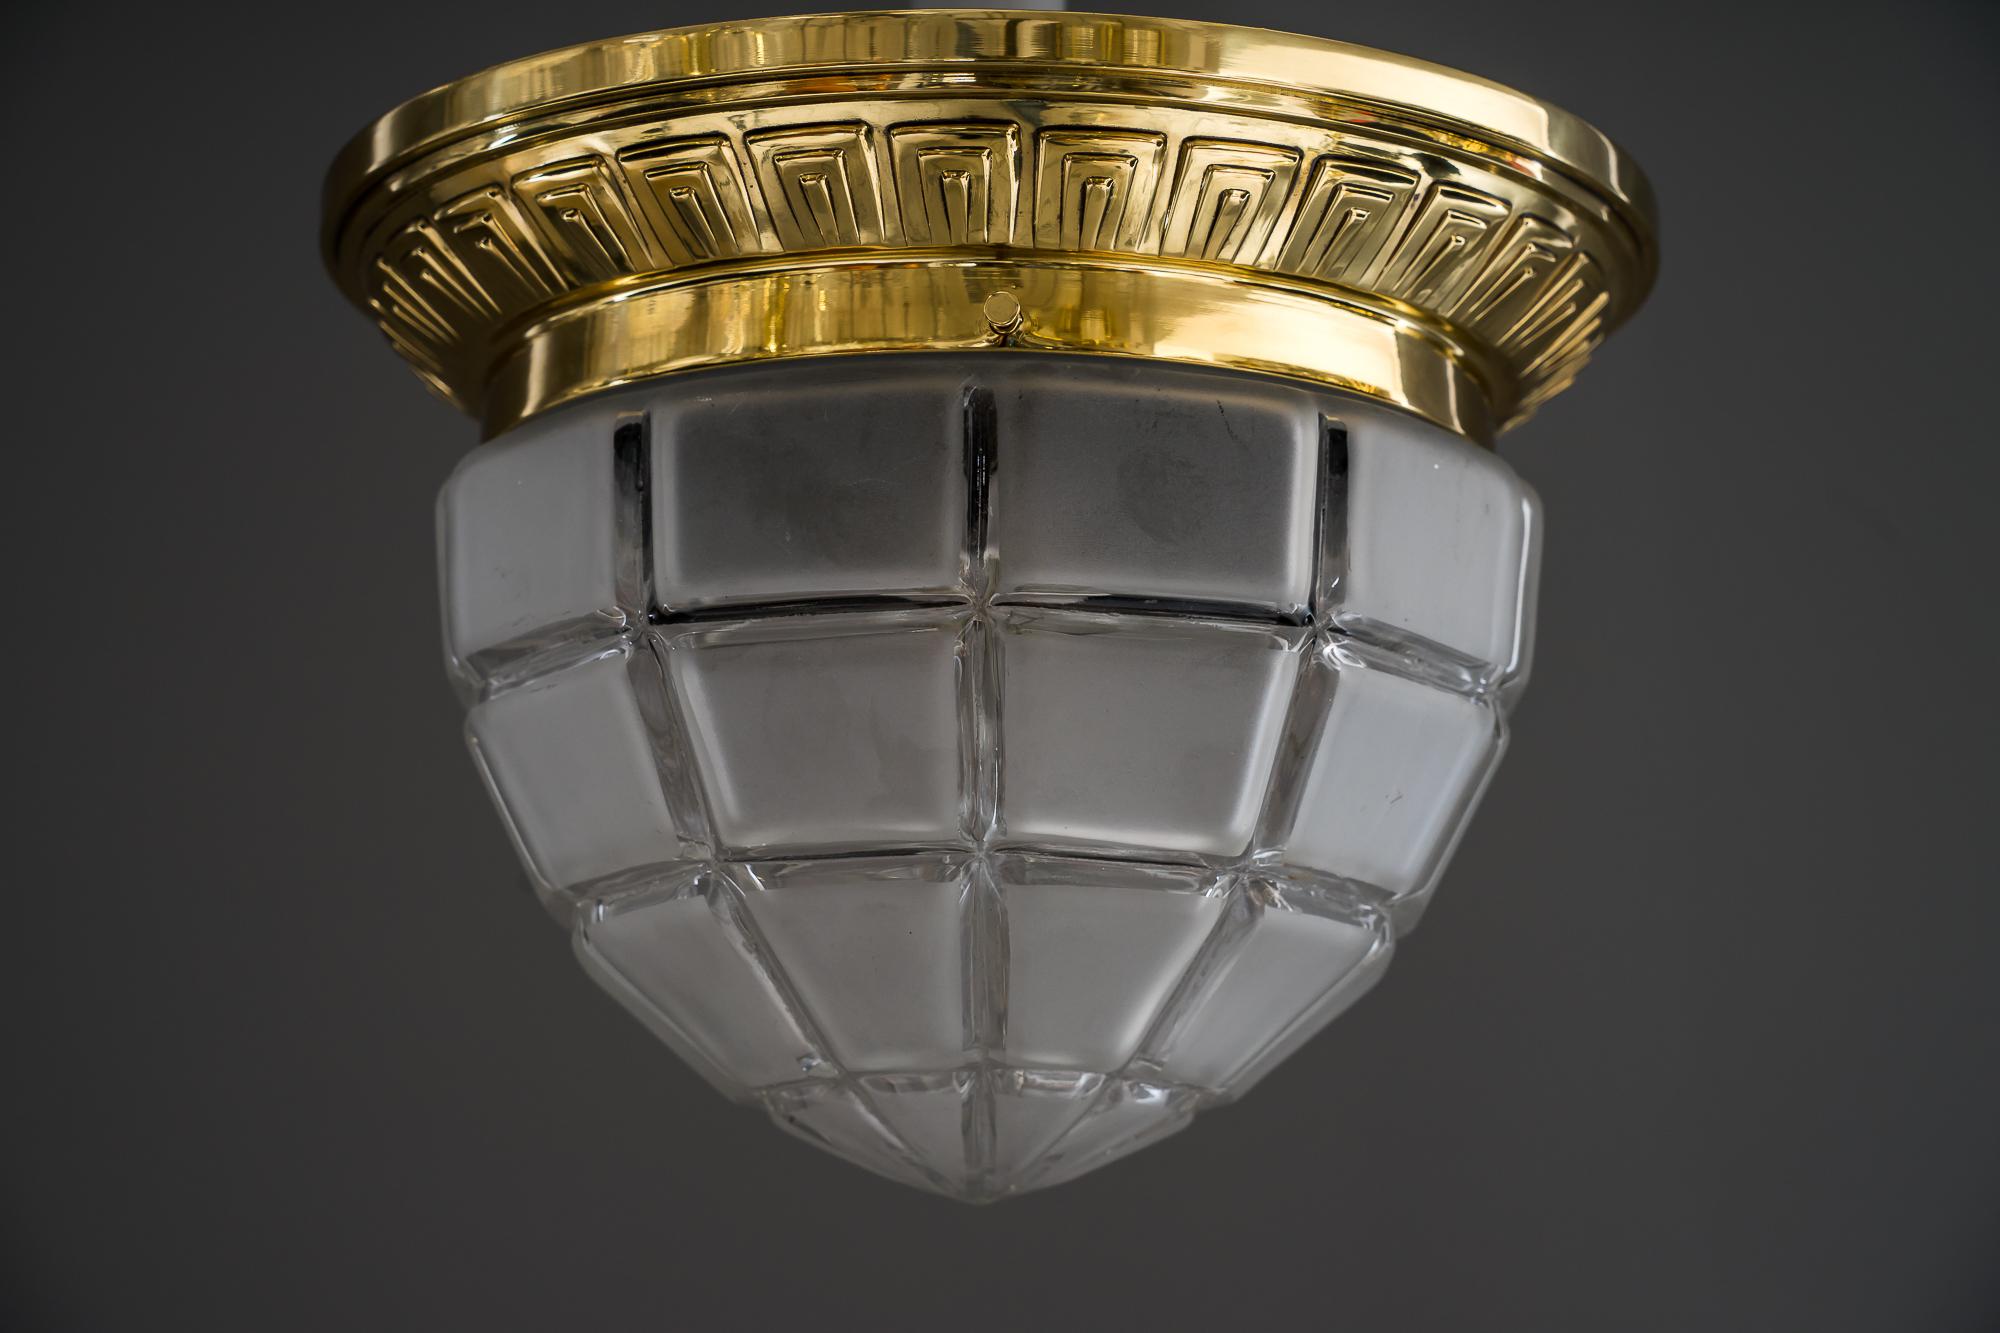 Art Deco ceiling lamp Vienna around 1920s
Brass polished and stove enamelled
Matt glass with clear edges
1 Bulb.